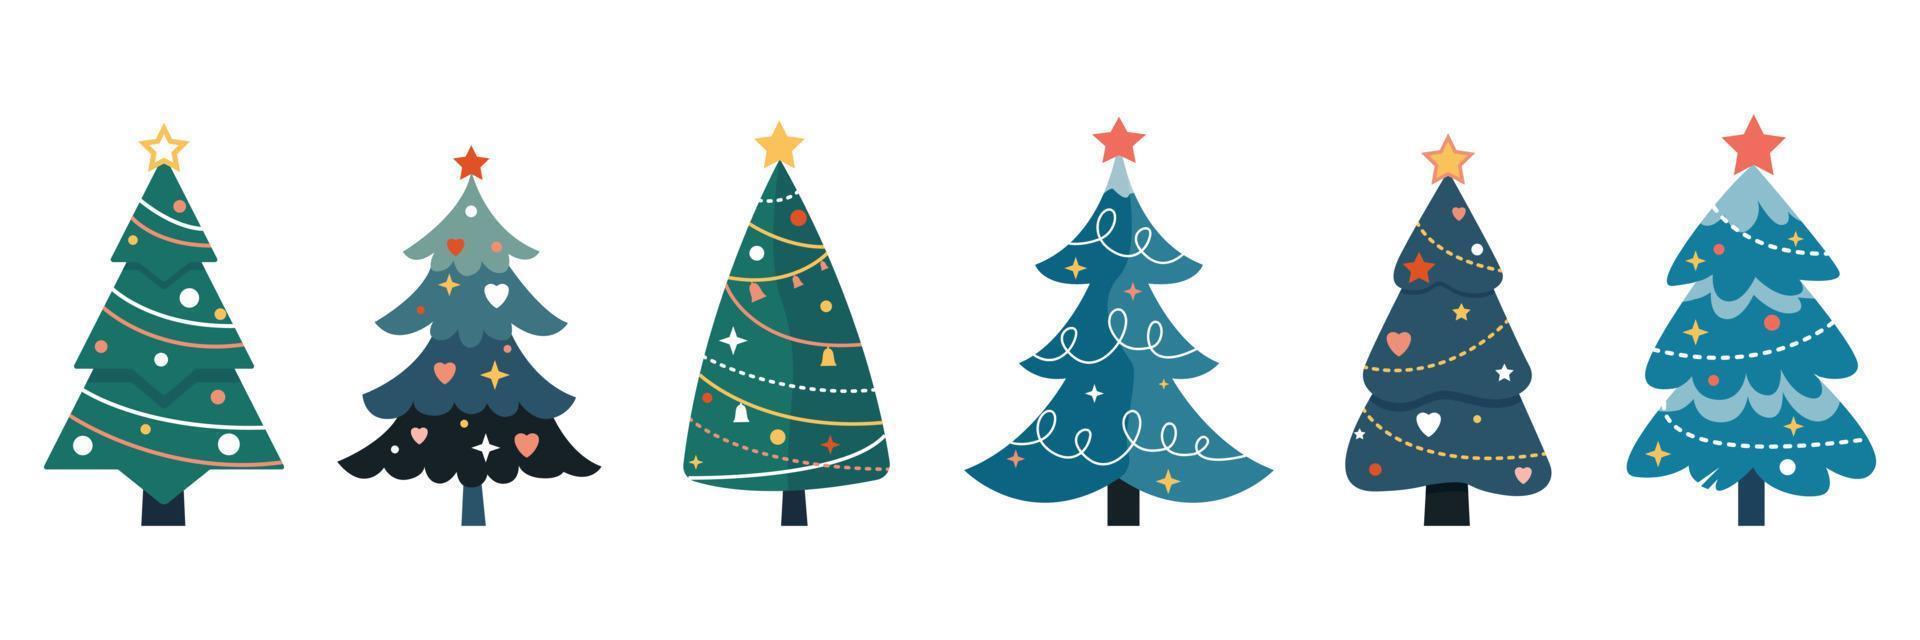 Collection of christmas trees. Set of cartoon pines for greeting card, invitation, banner, web. Christmas decorative elements are isolated on a white background. vector